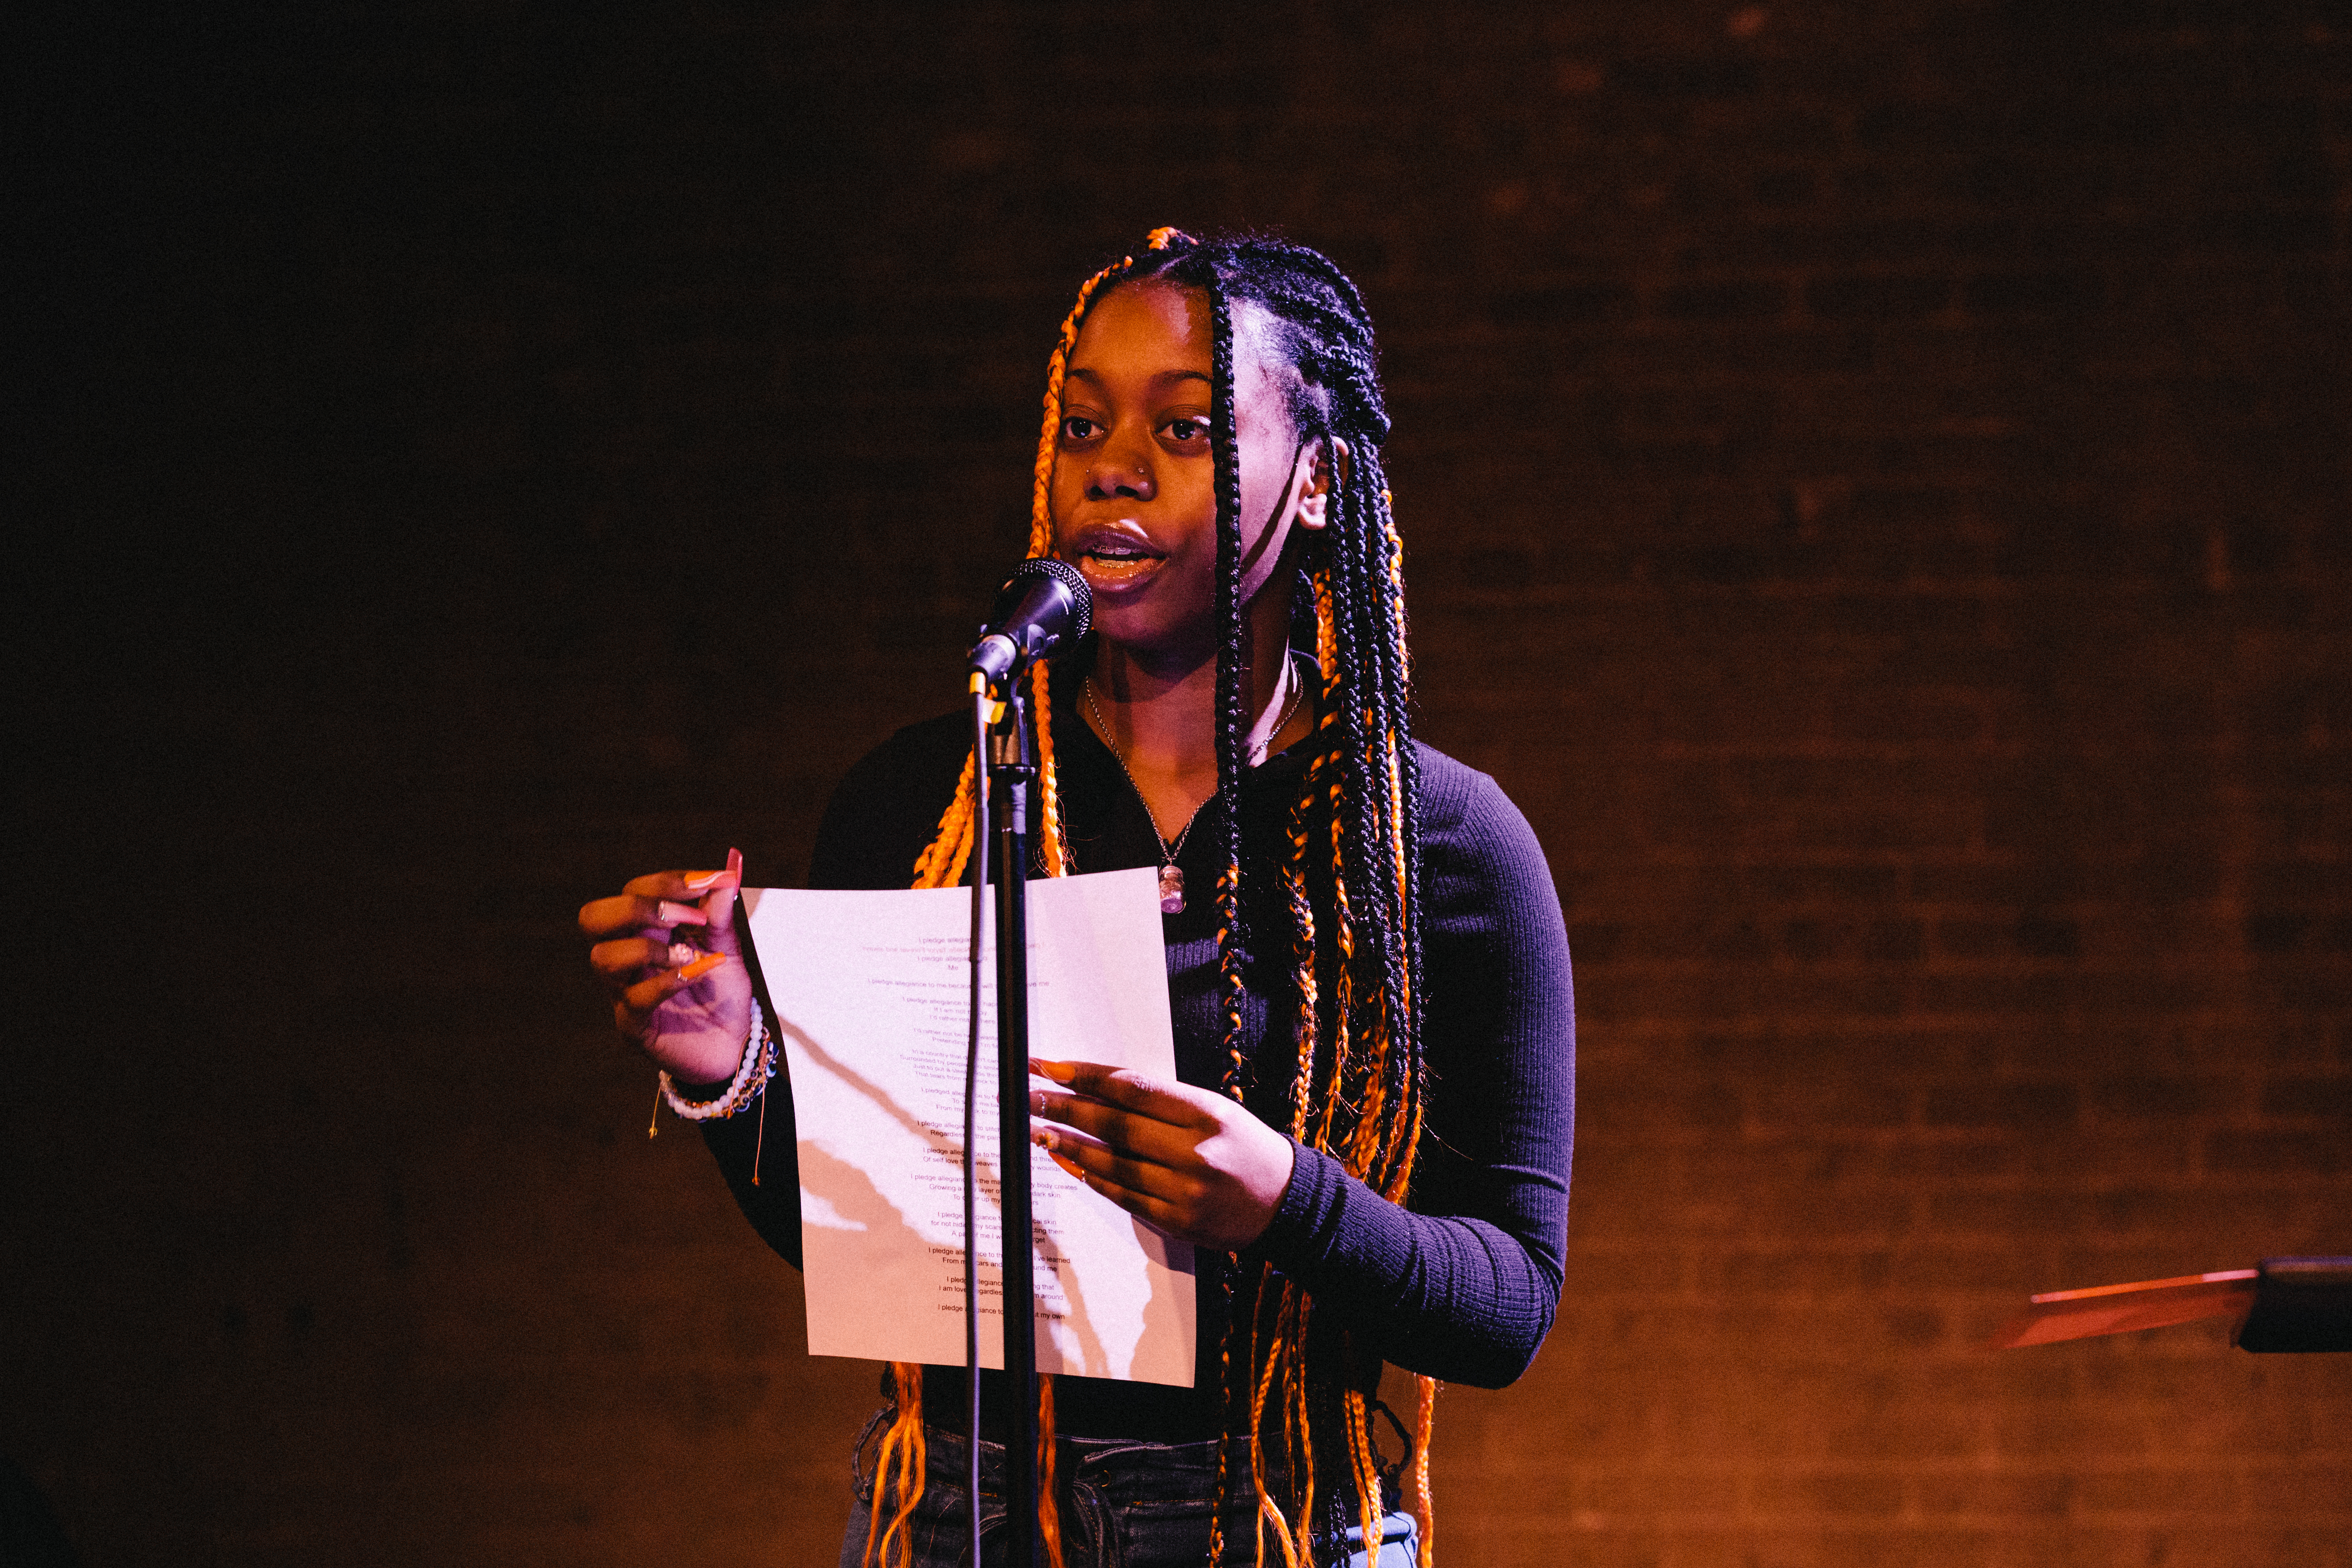 InsideOut student poet performs at the public showcase in 2023. She has long braids and holds a poem on paper at a microphone against a dark background.